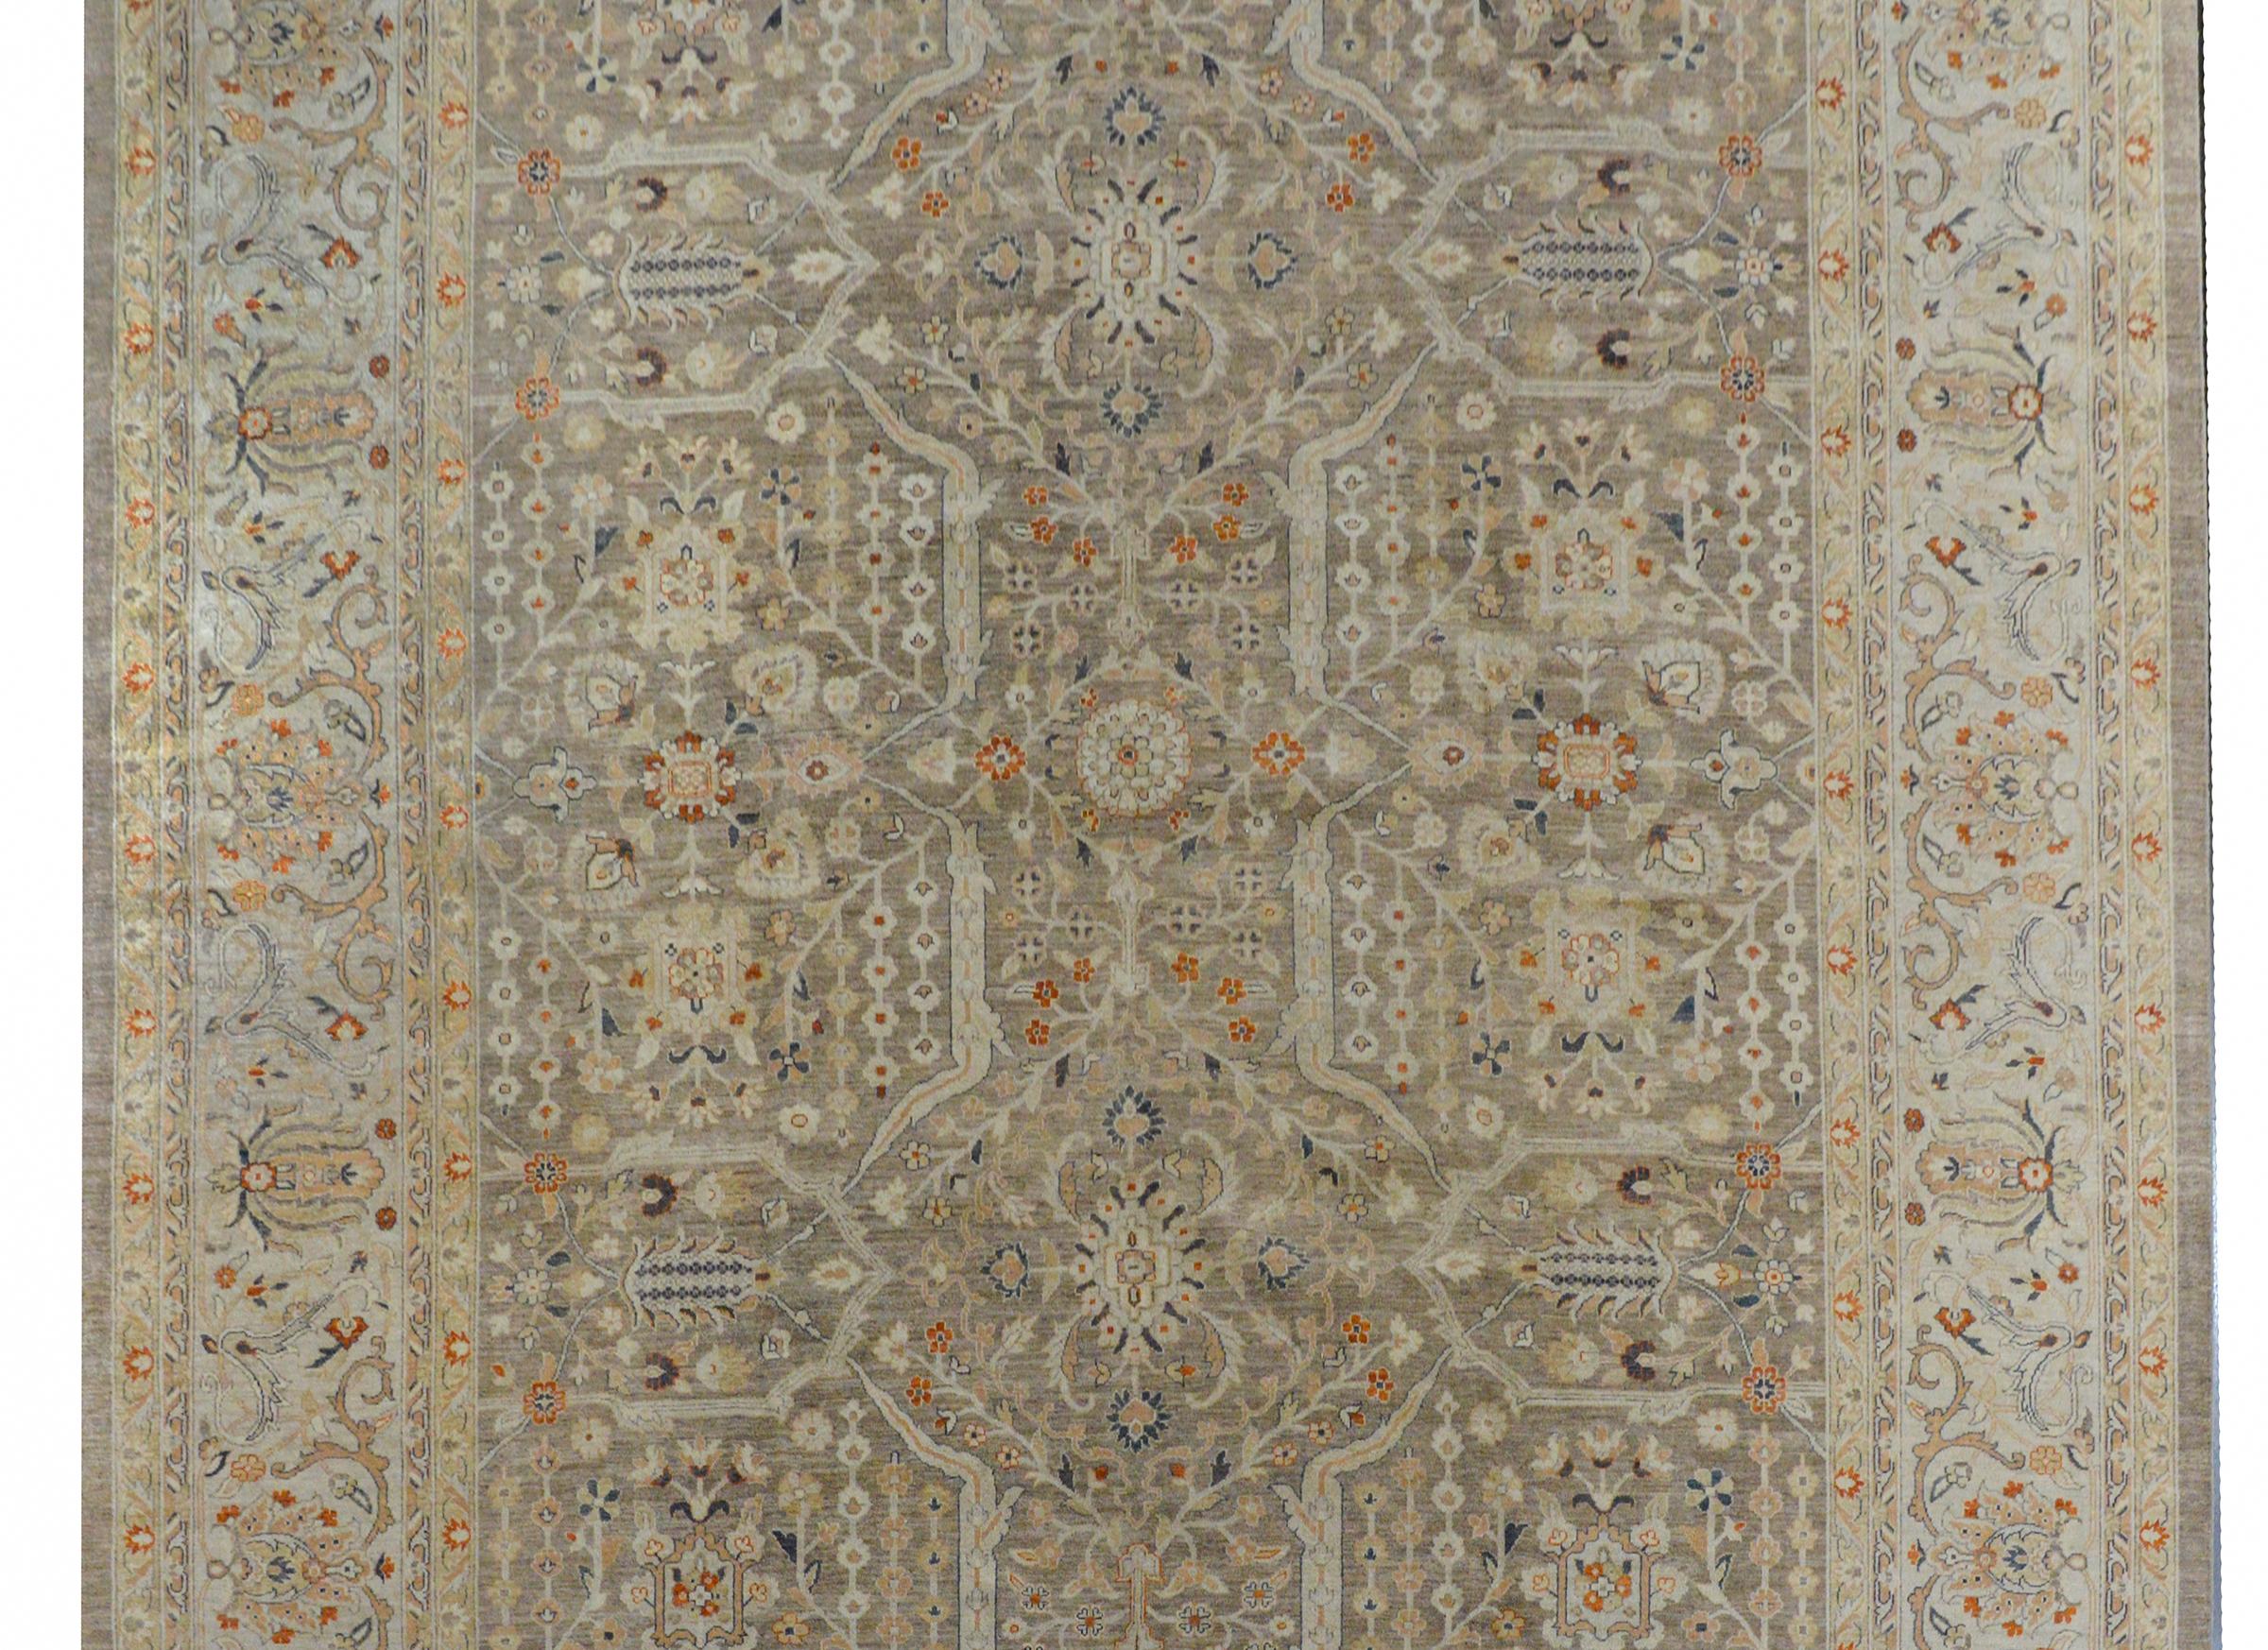 A beautiful contemporary Indian Peshawar rug with an all-over pattern of myriad flowers, vines, and leaves woven in orange, indigo, gold, and cream colored wool on a gray background. The border is woven in similar colors with a wide floral and vine